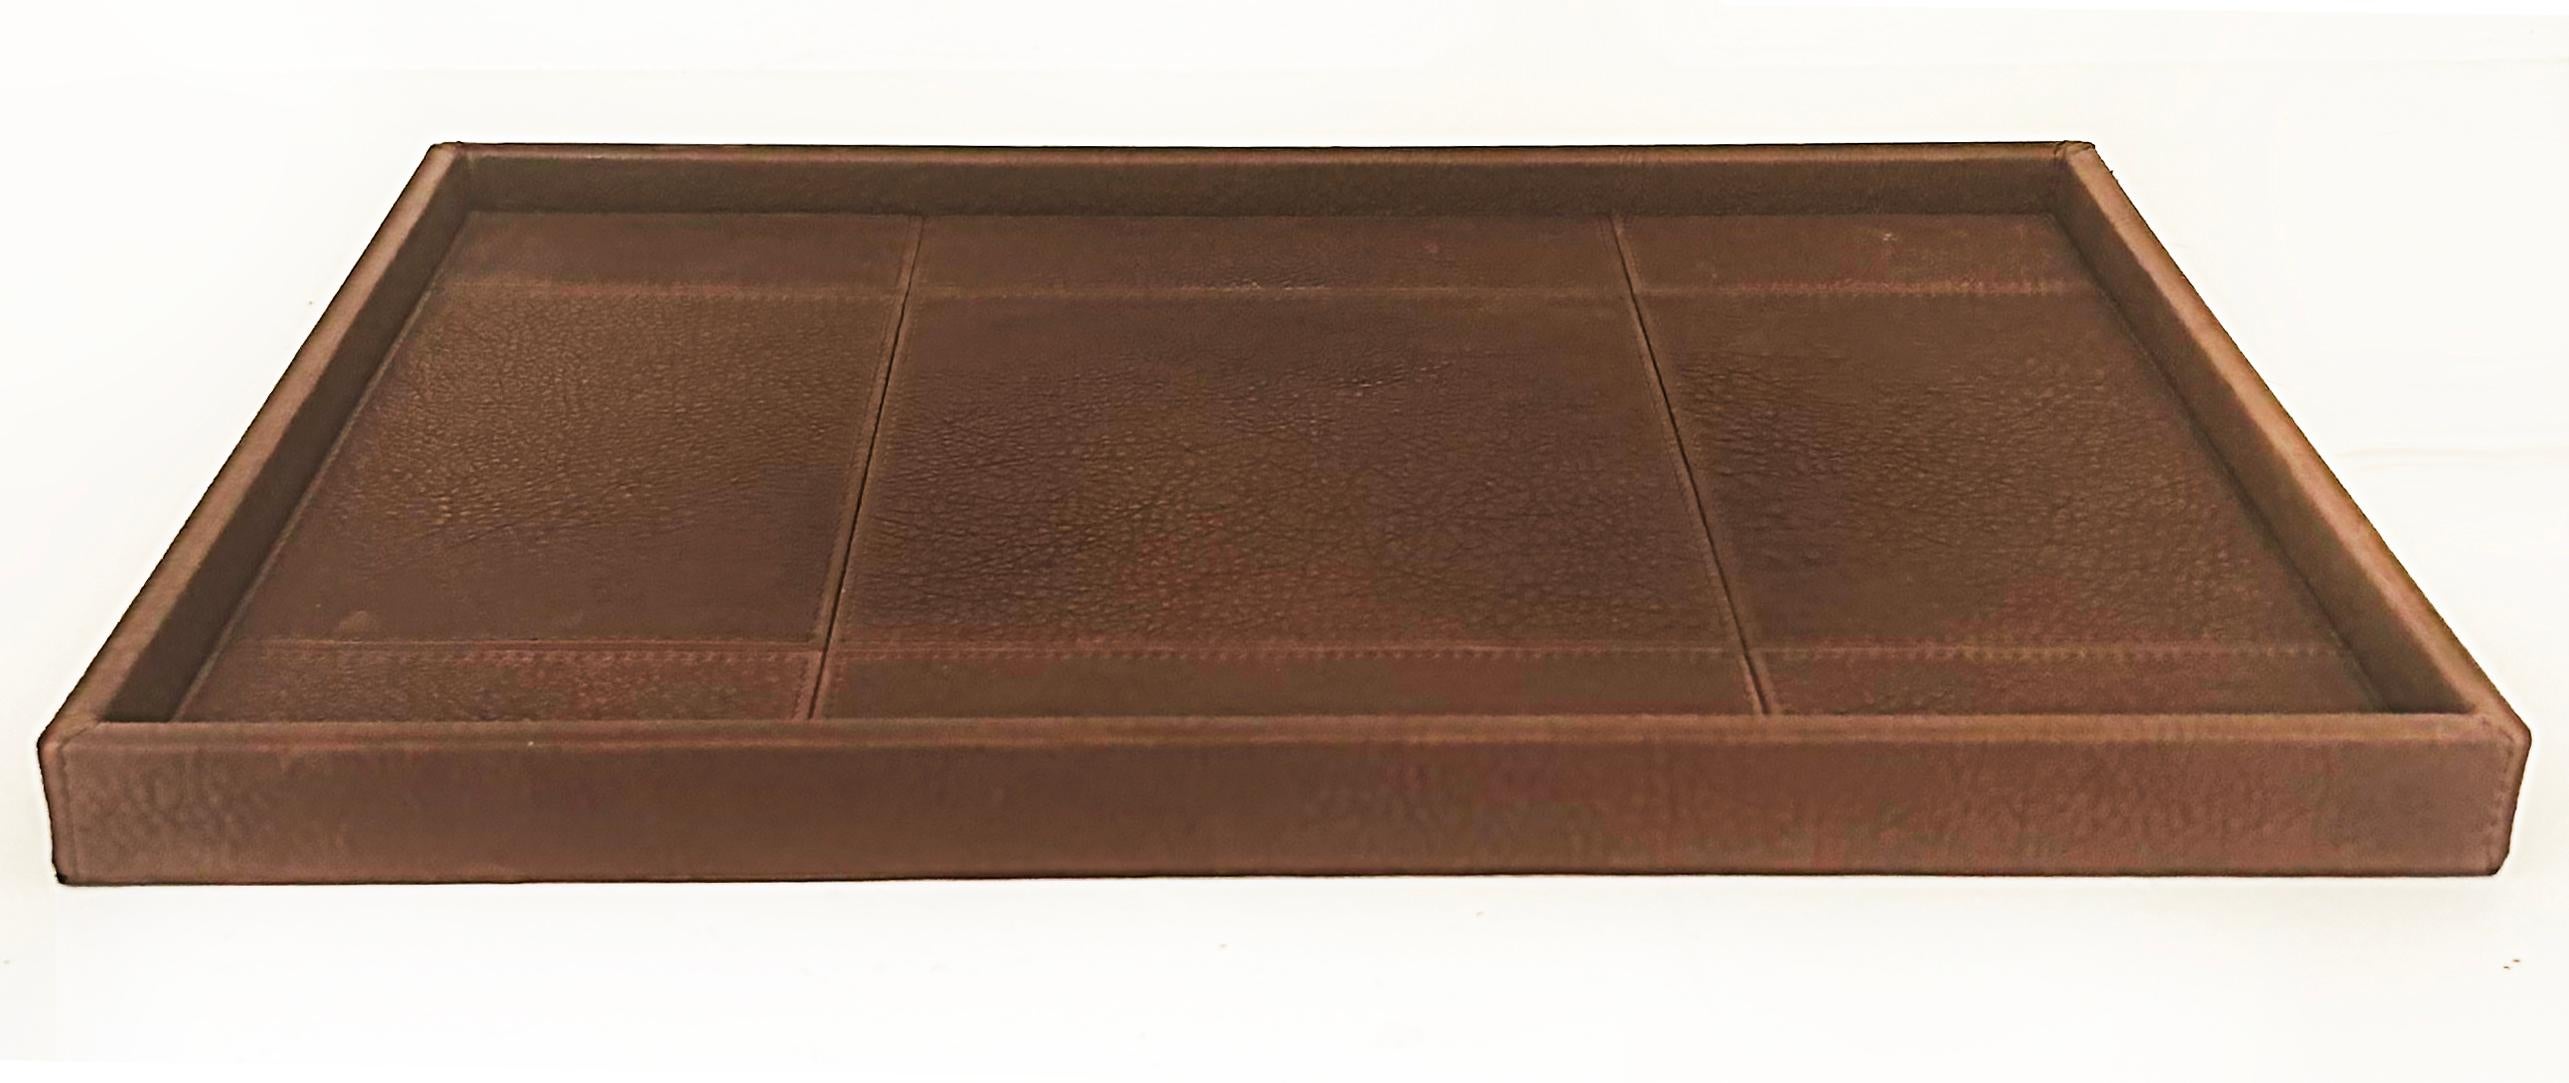 French Gilles Caffier Leather Clad Vanity Tray Made in France 2006 For Sale